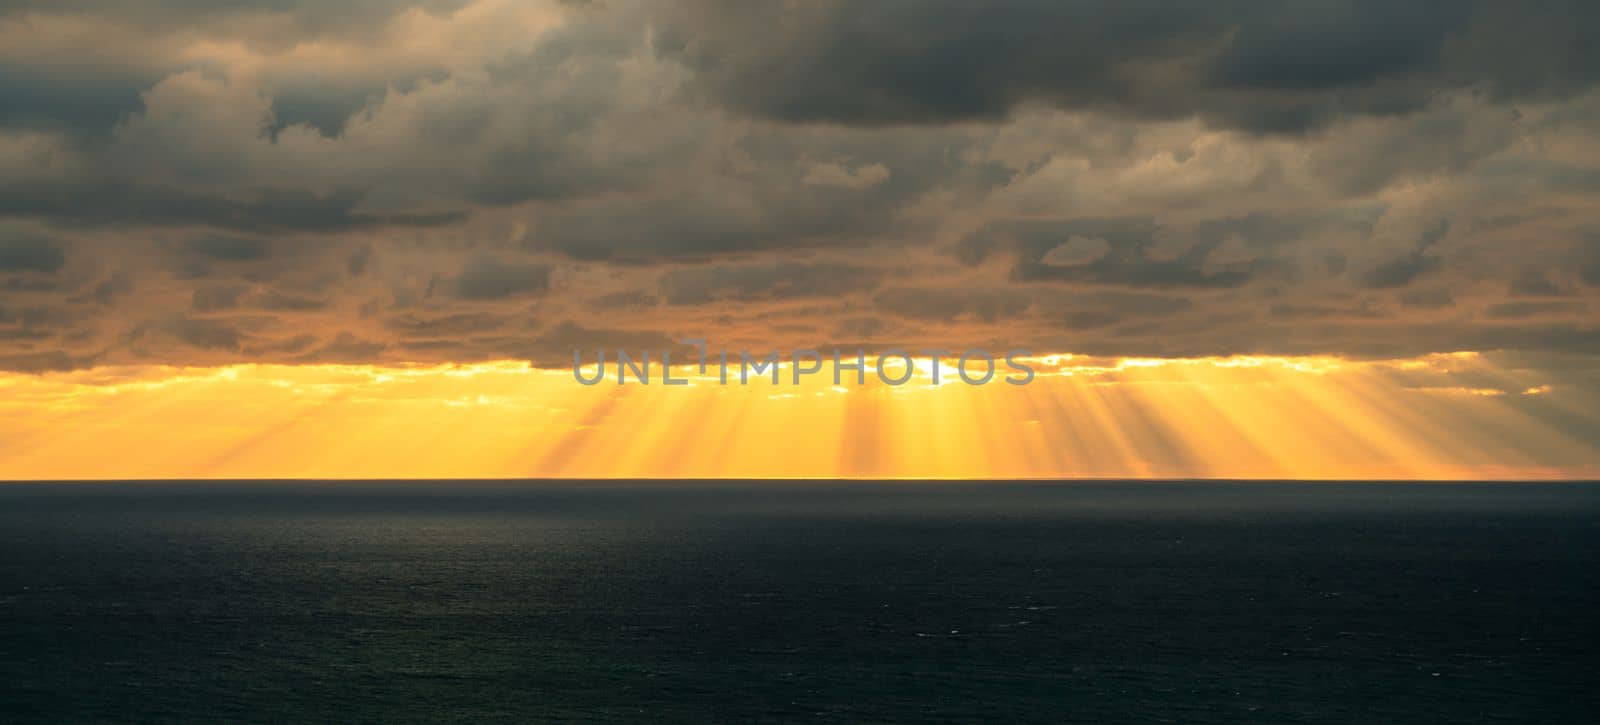 Sunbeams by the sea of clouds baner. Seascape with dark clouds and the rays of the sun from them. by Matiunina